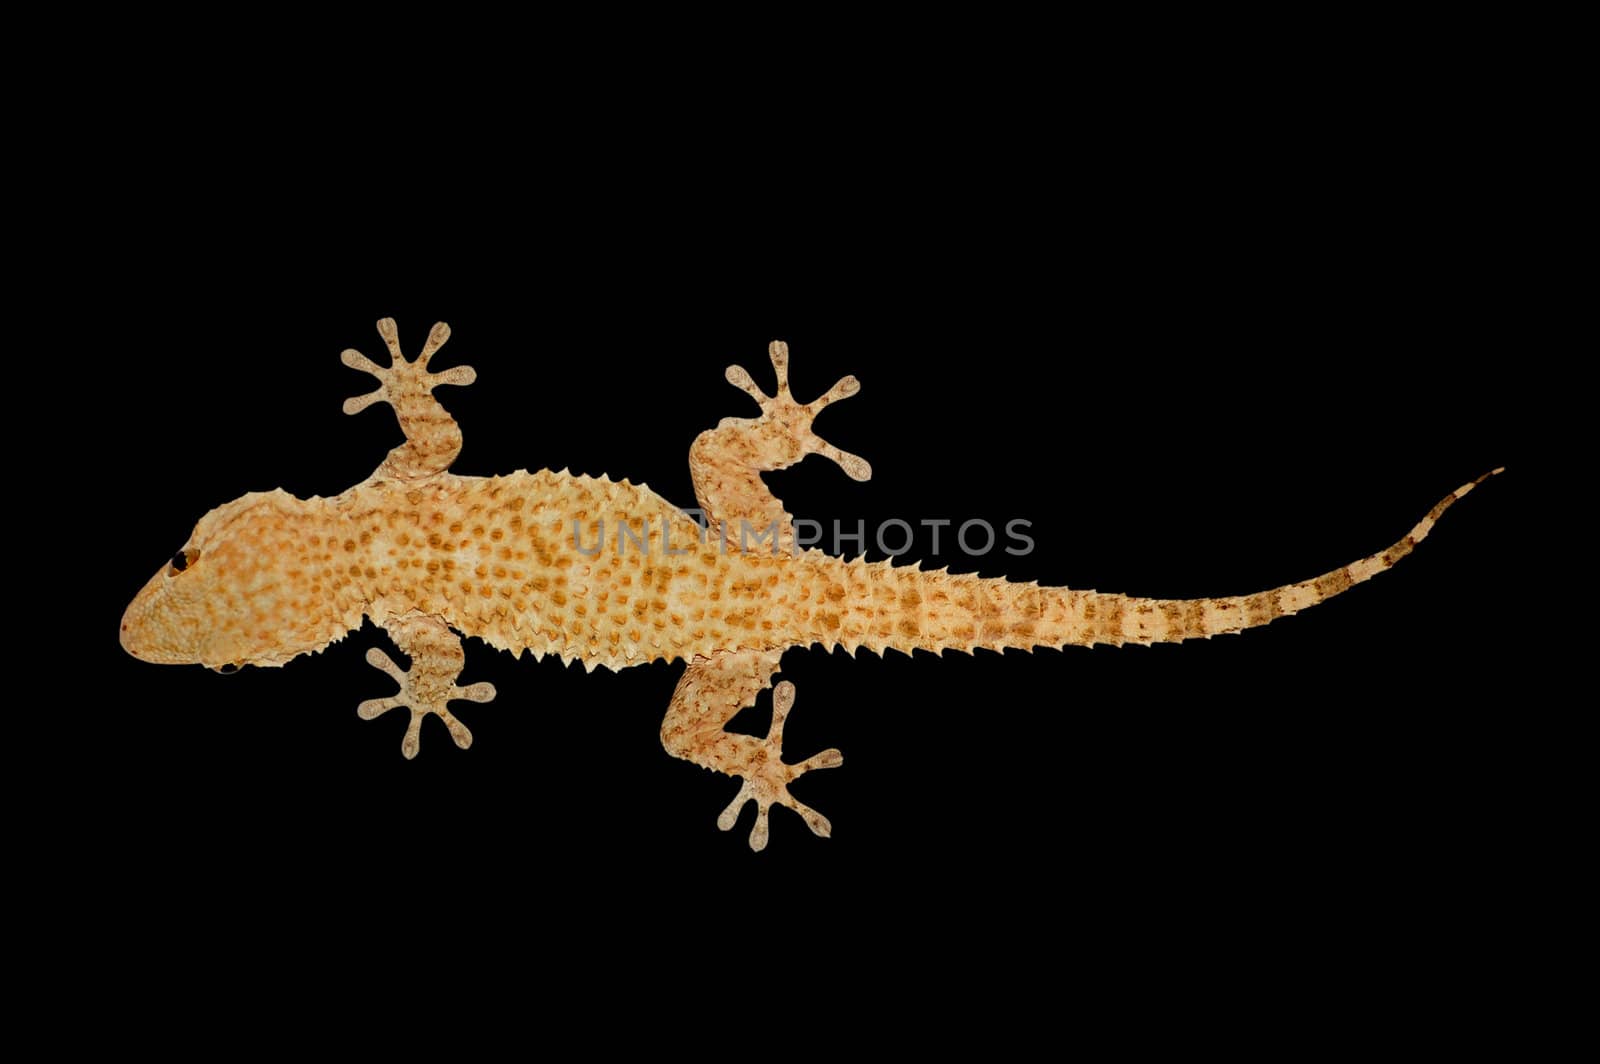 Nocturnal house gecko reptile lizard against a black background.